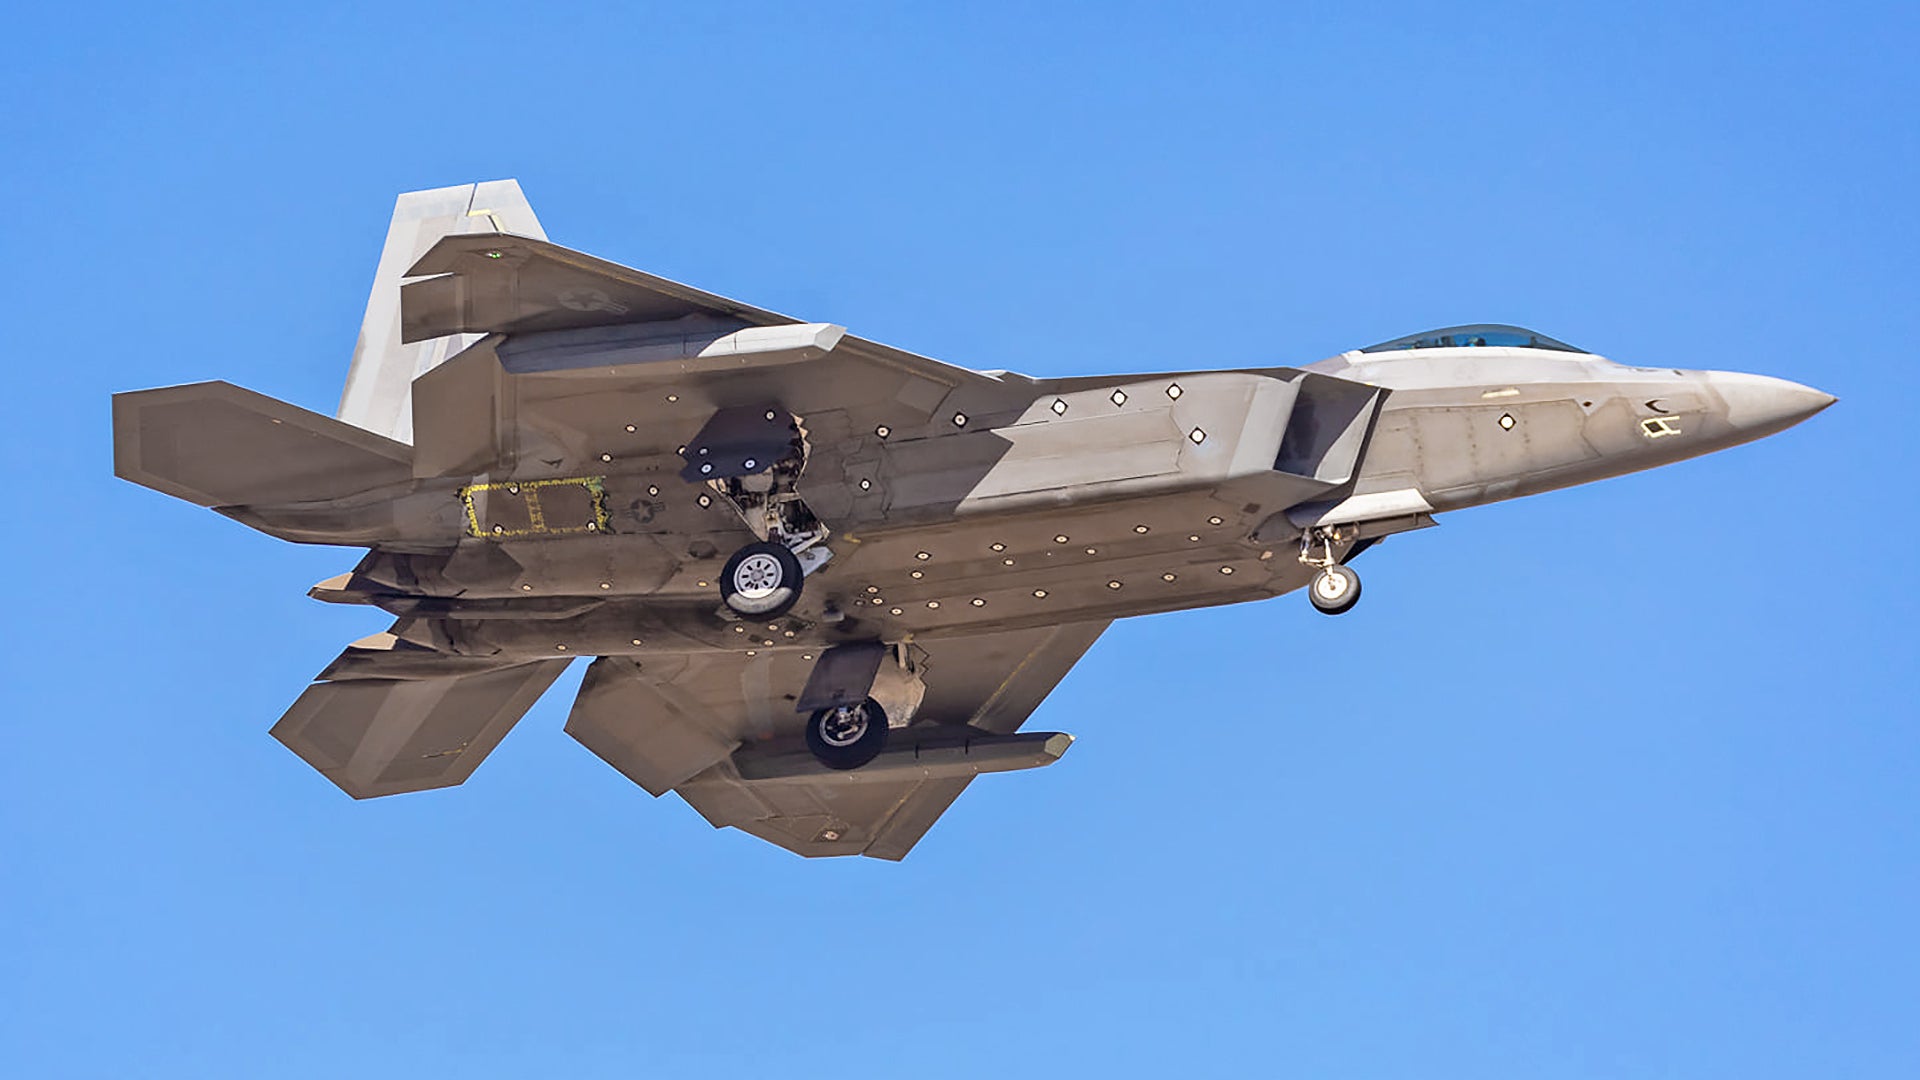 F-22 Raptor Spotted Flying With Stealthy Underwing Pods | The Drive